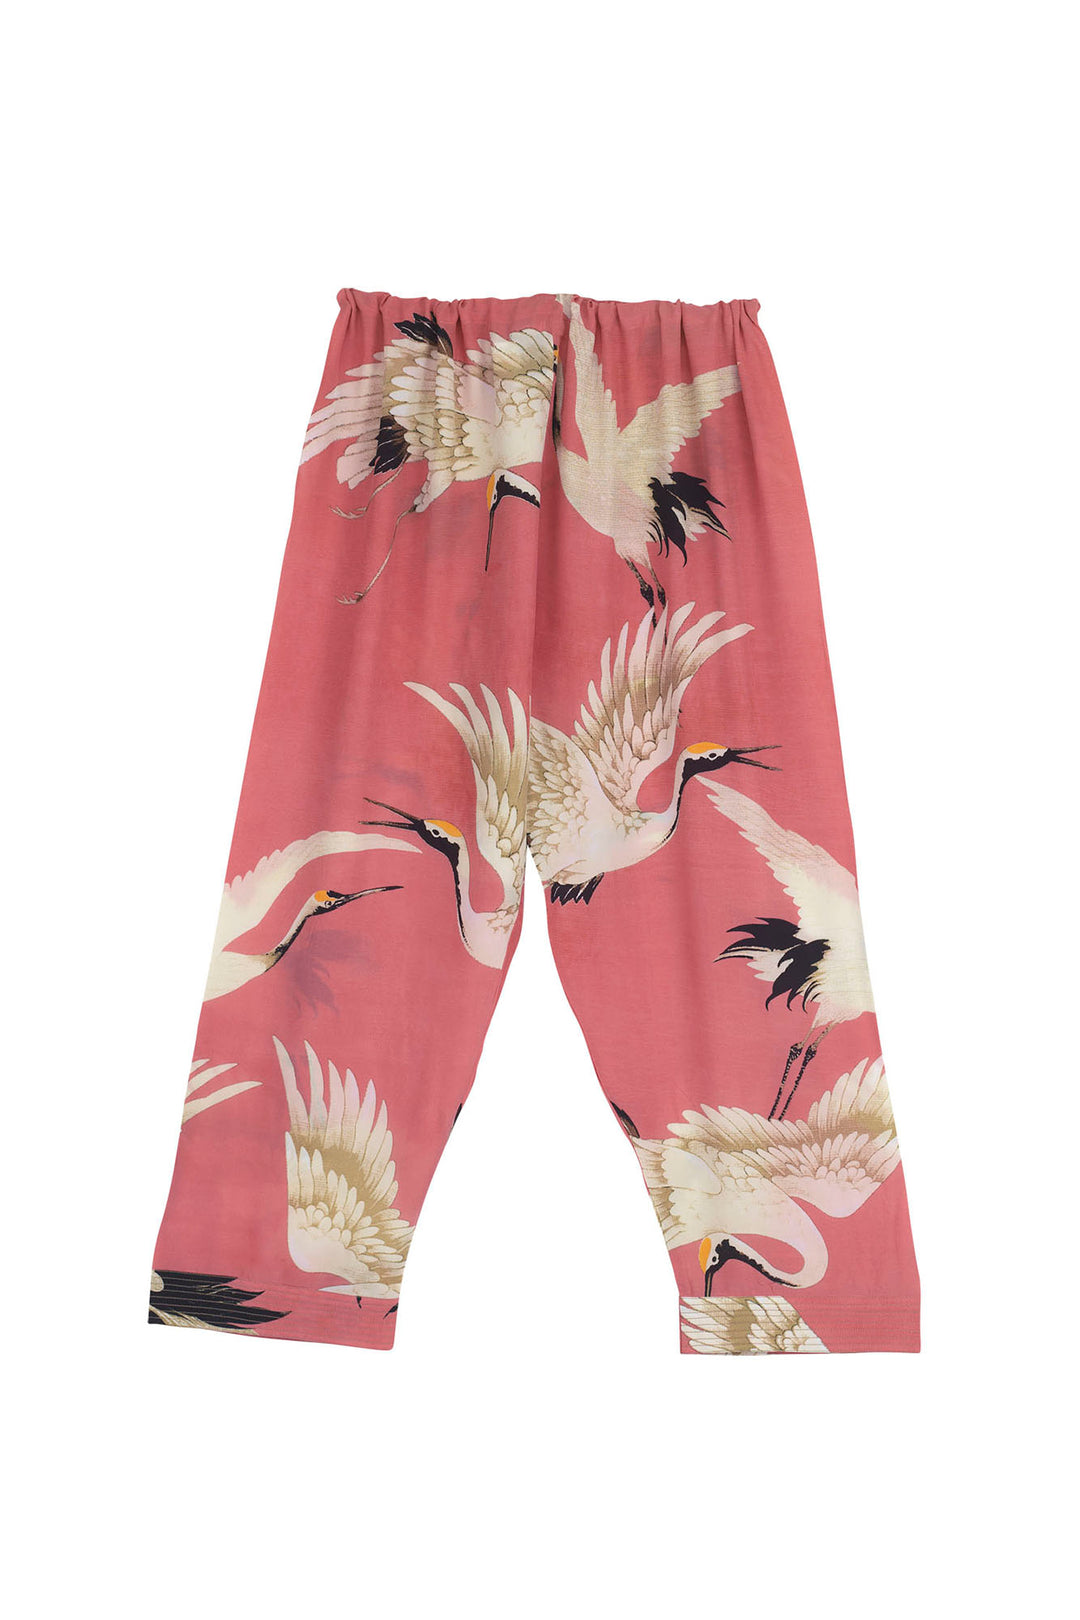 One Hundred Stars Stork Crane Lipstick Pink Crepe Lounge Pants are perfect for adding a stylish bright print to your wardrobe this season. 